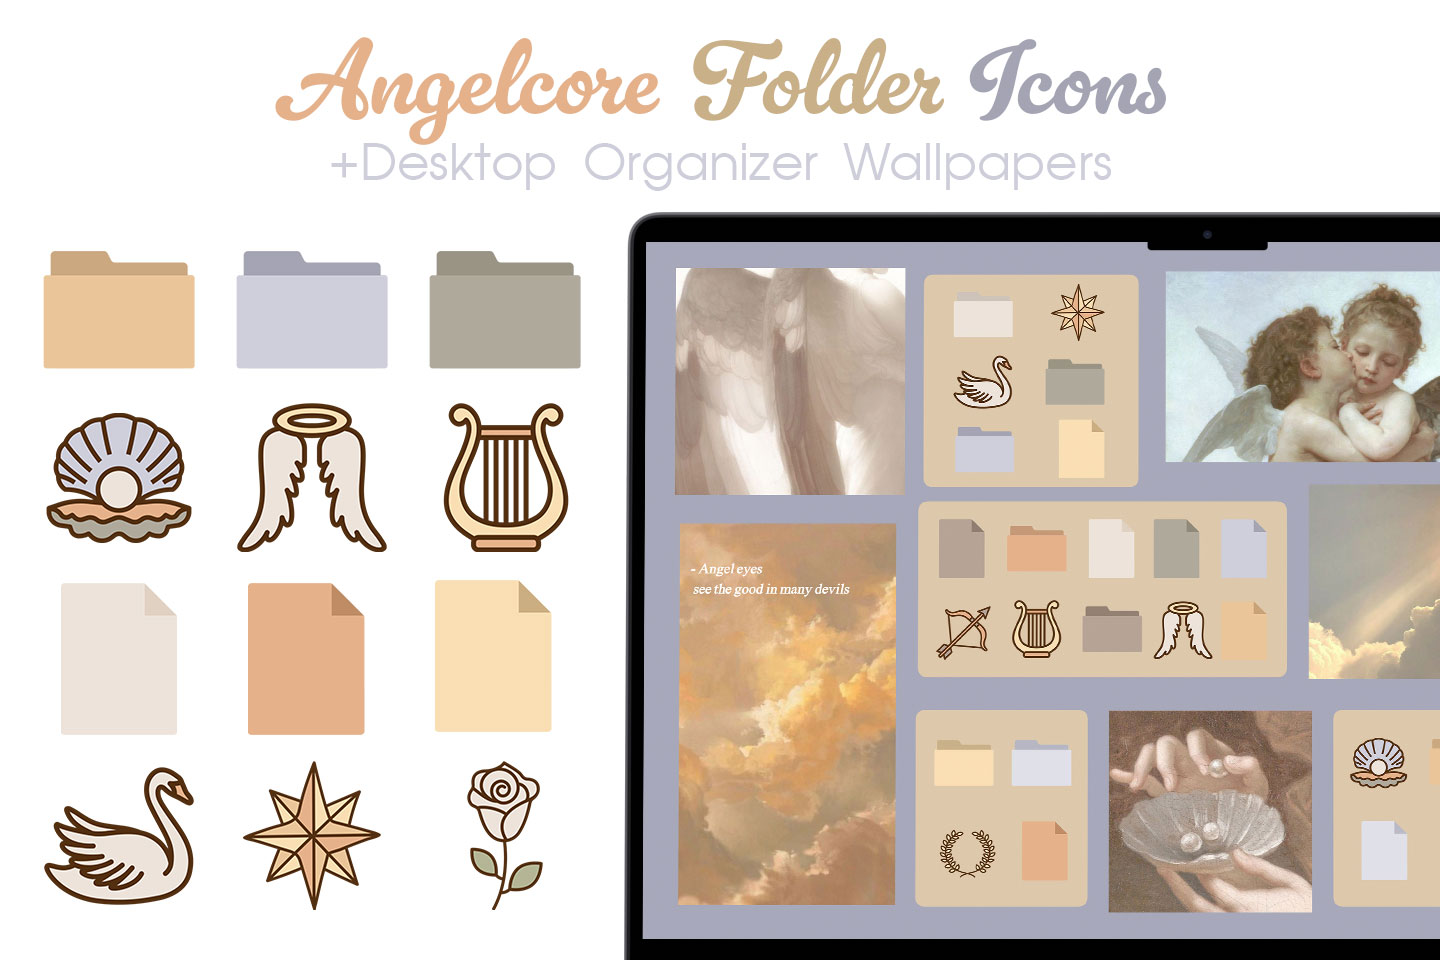 angelcore folder icons pack